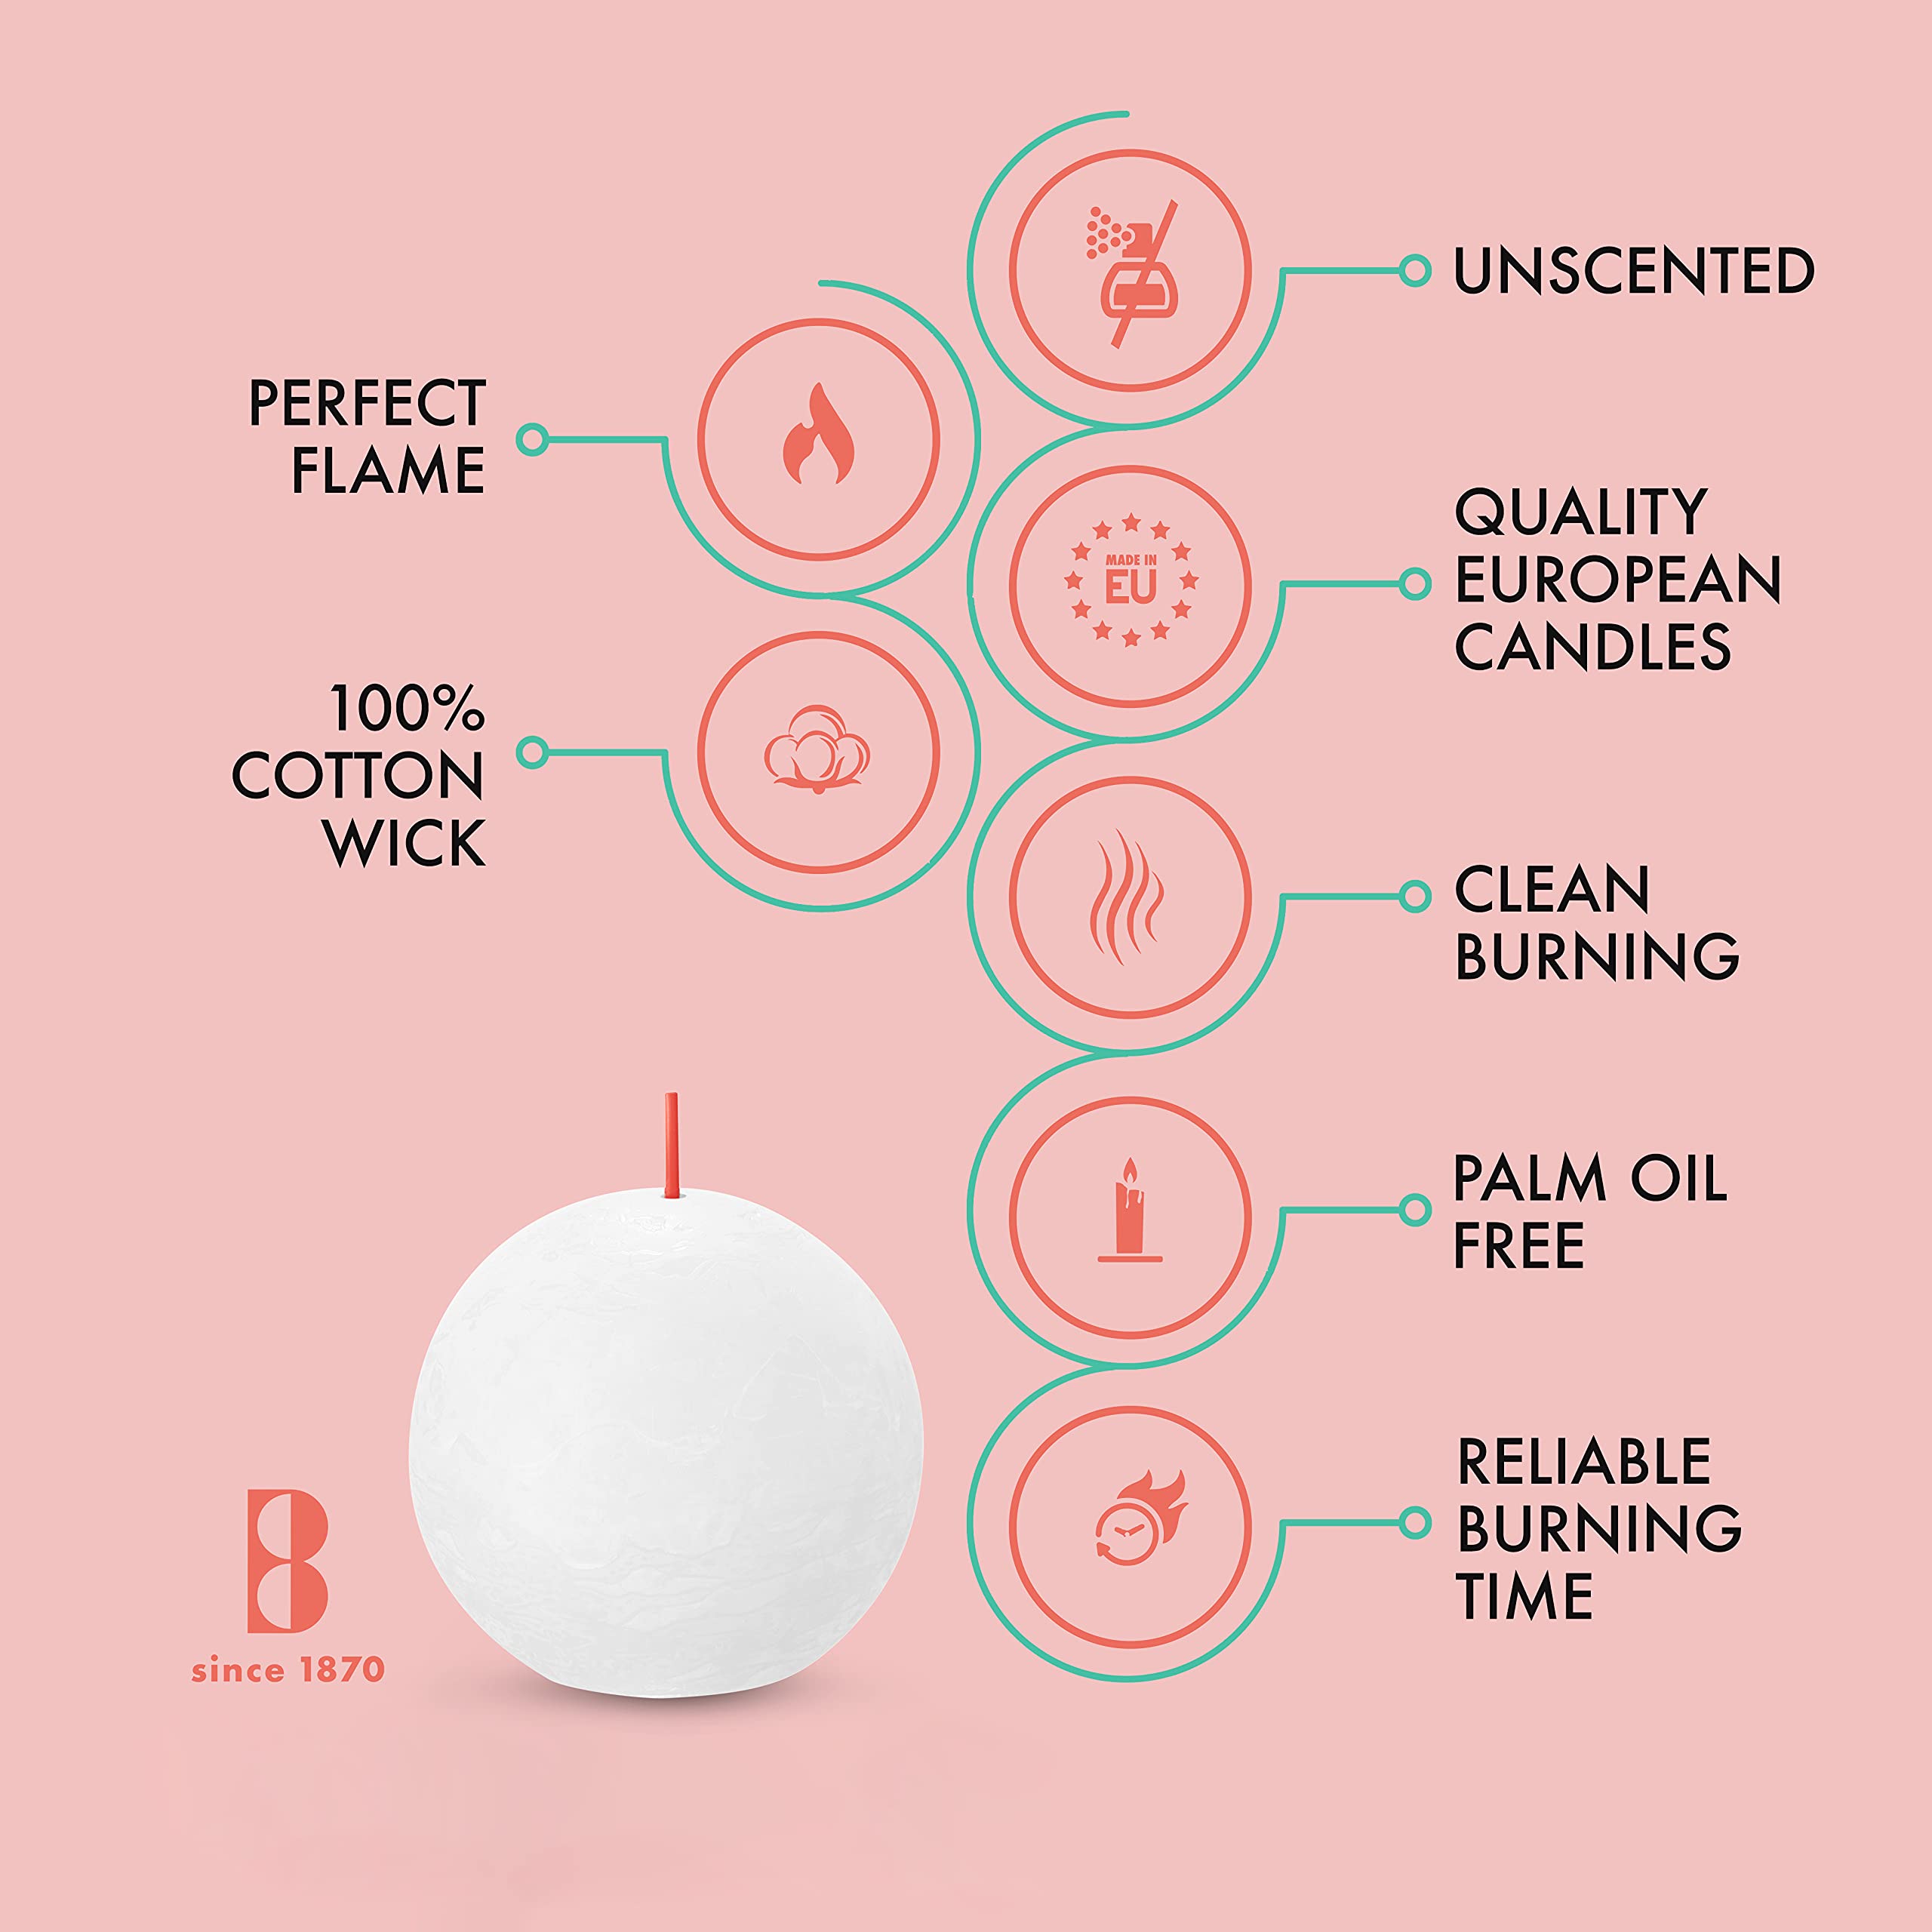 BOLSIUS 3 Pack Pillar Candles - 3 Inch - Premium European Quality - Natural Eco-Friendly Plant-Based Wax - Unscented Dripless Smokeless 25 Hour Party Décor and Wedding Candles  - Very Good